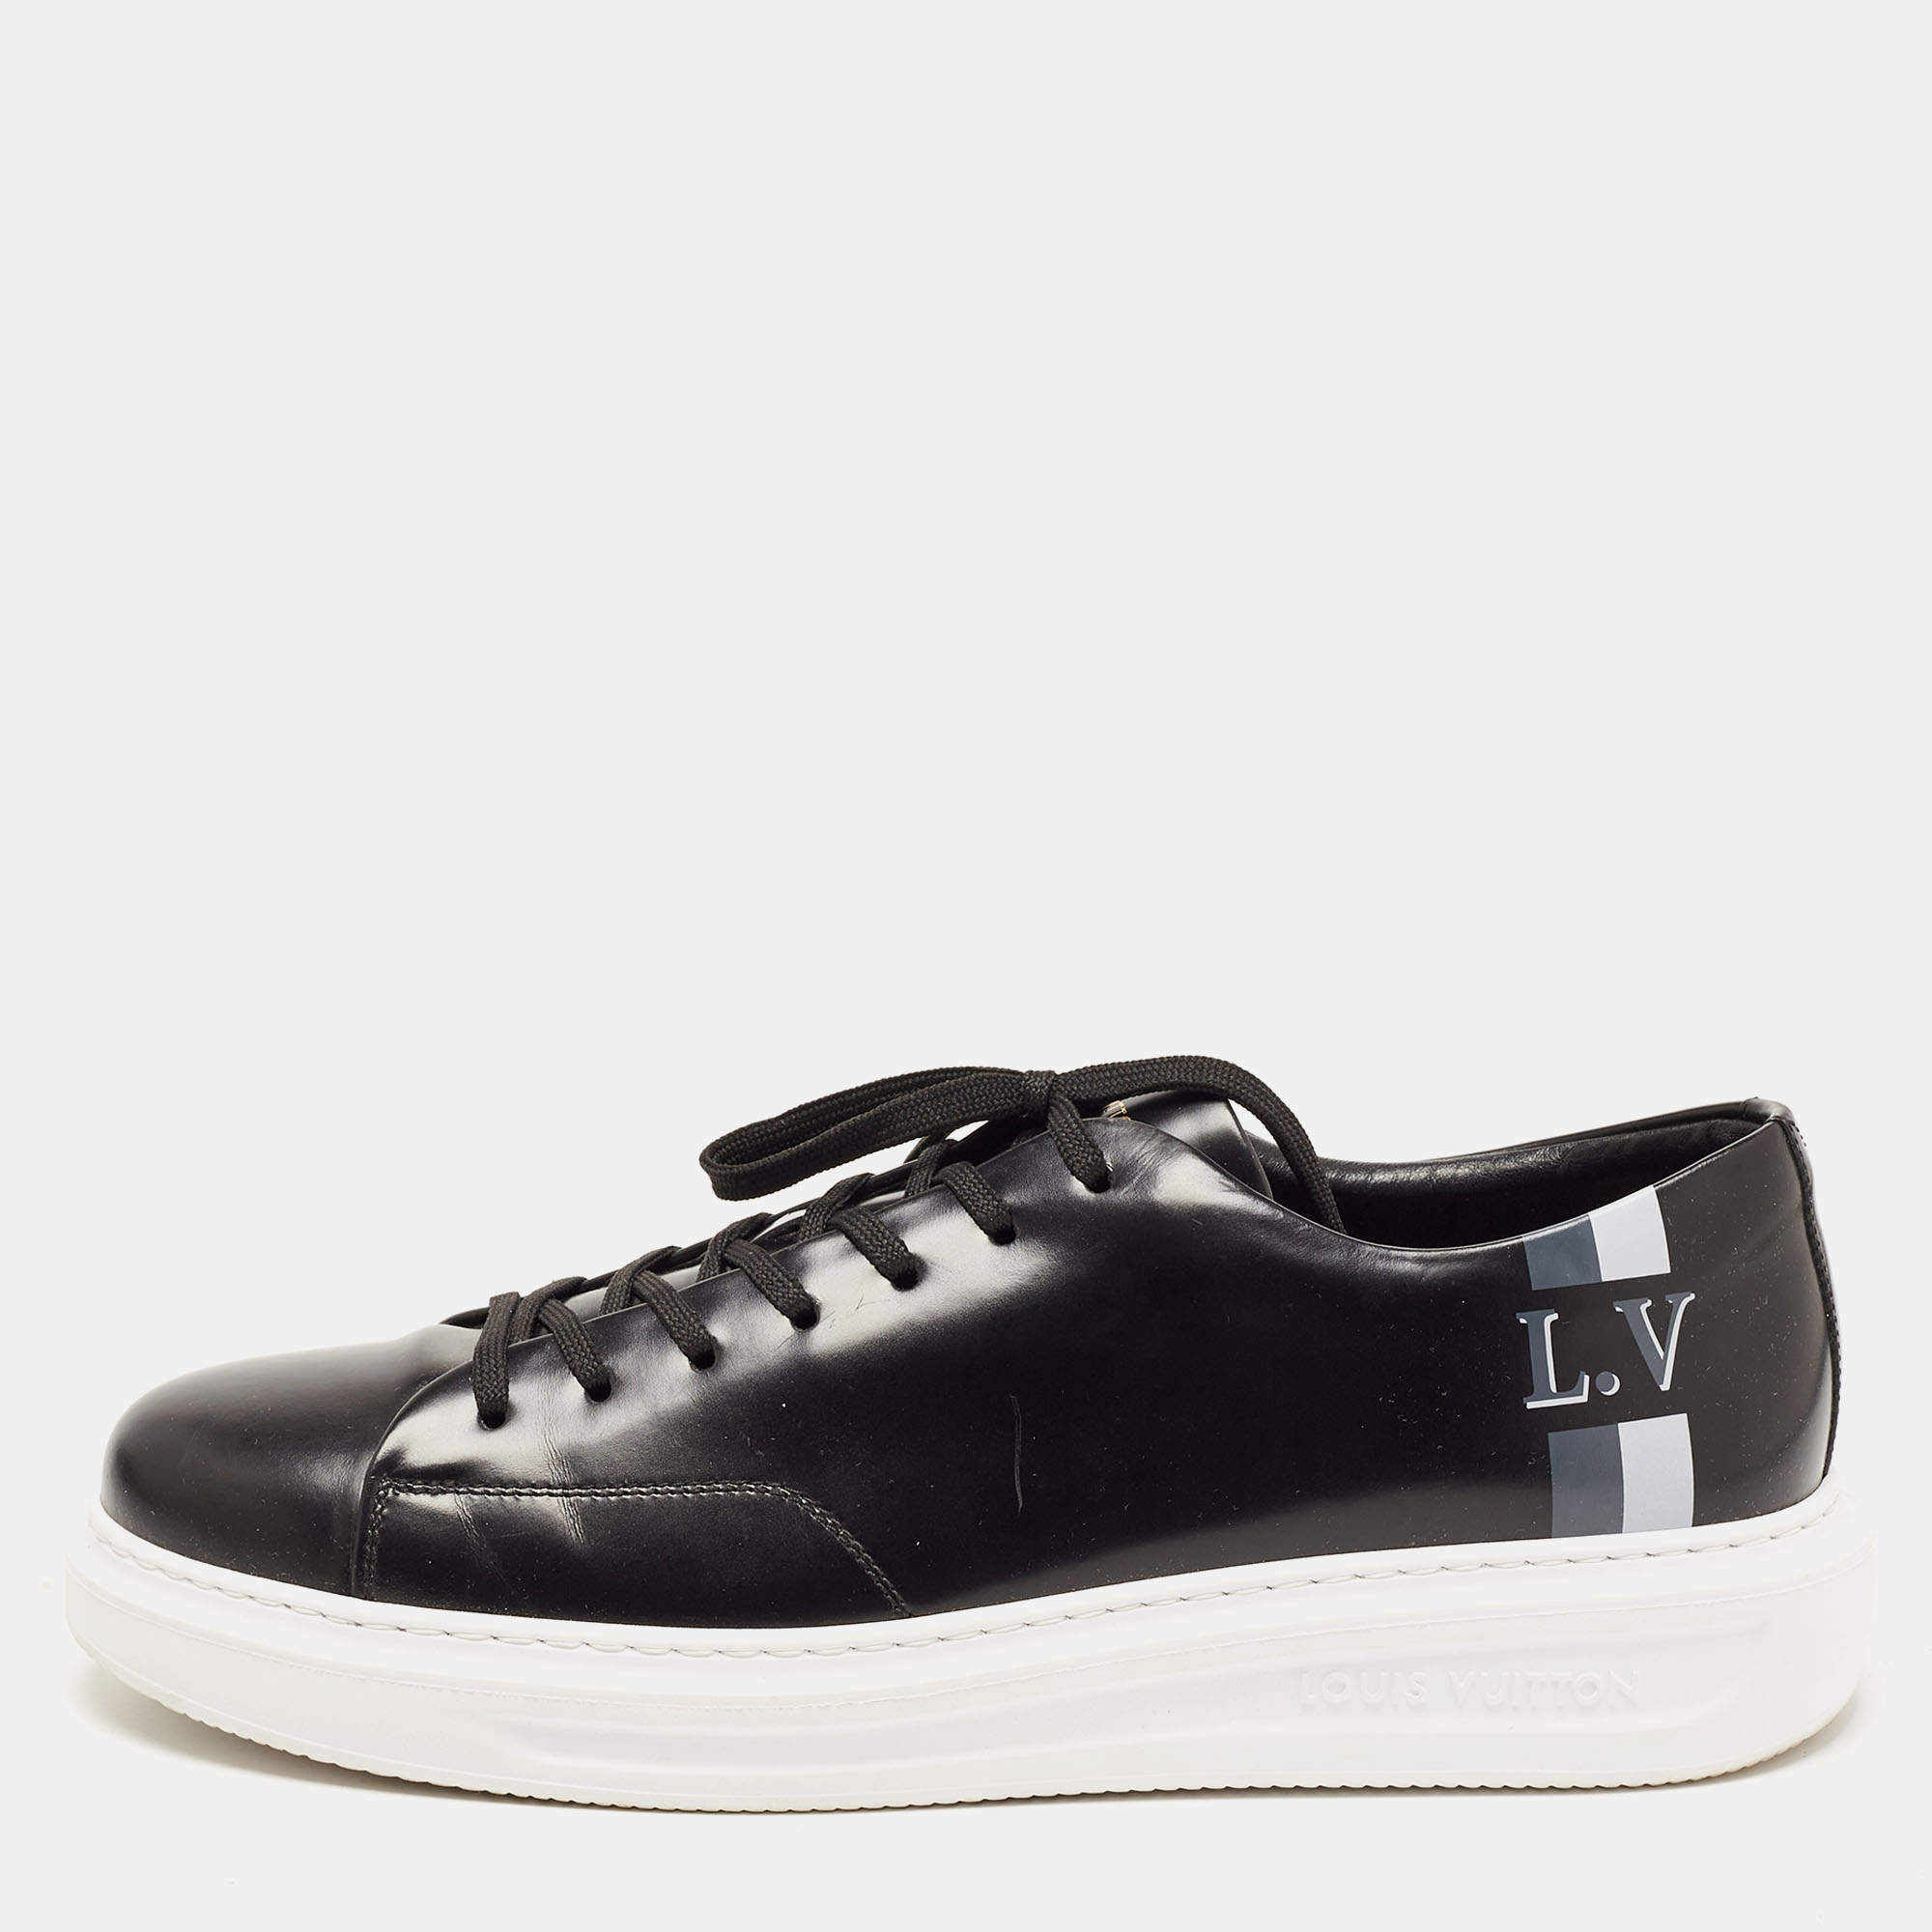 Beverly hills leather low trainers Louis Vuitton Black size 12 UK